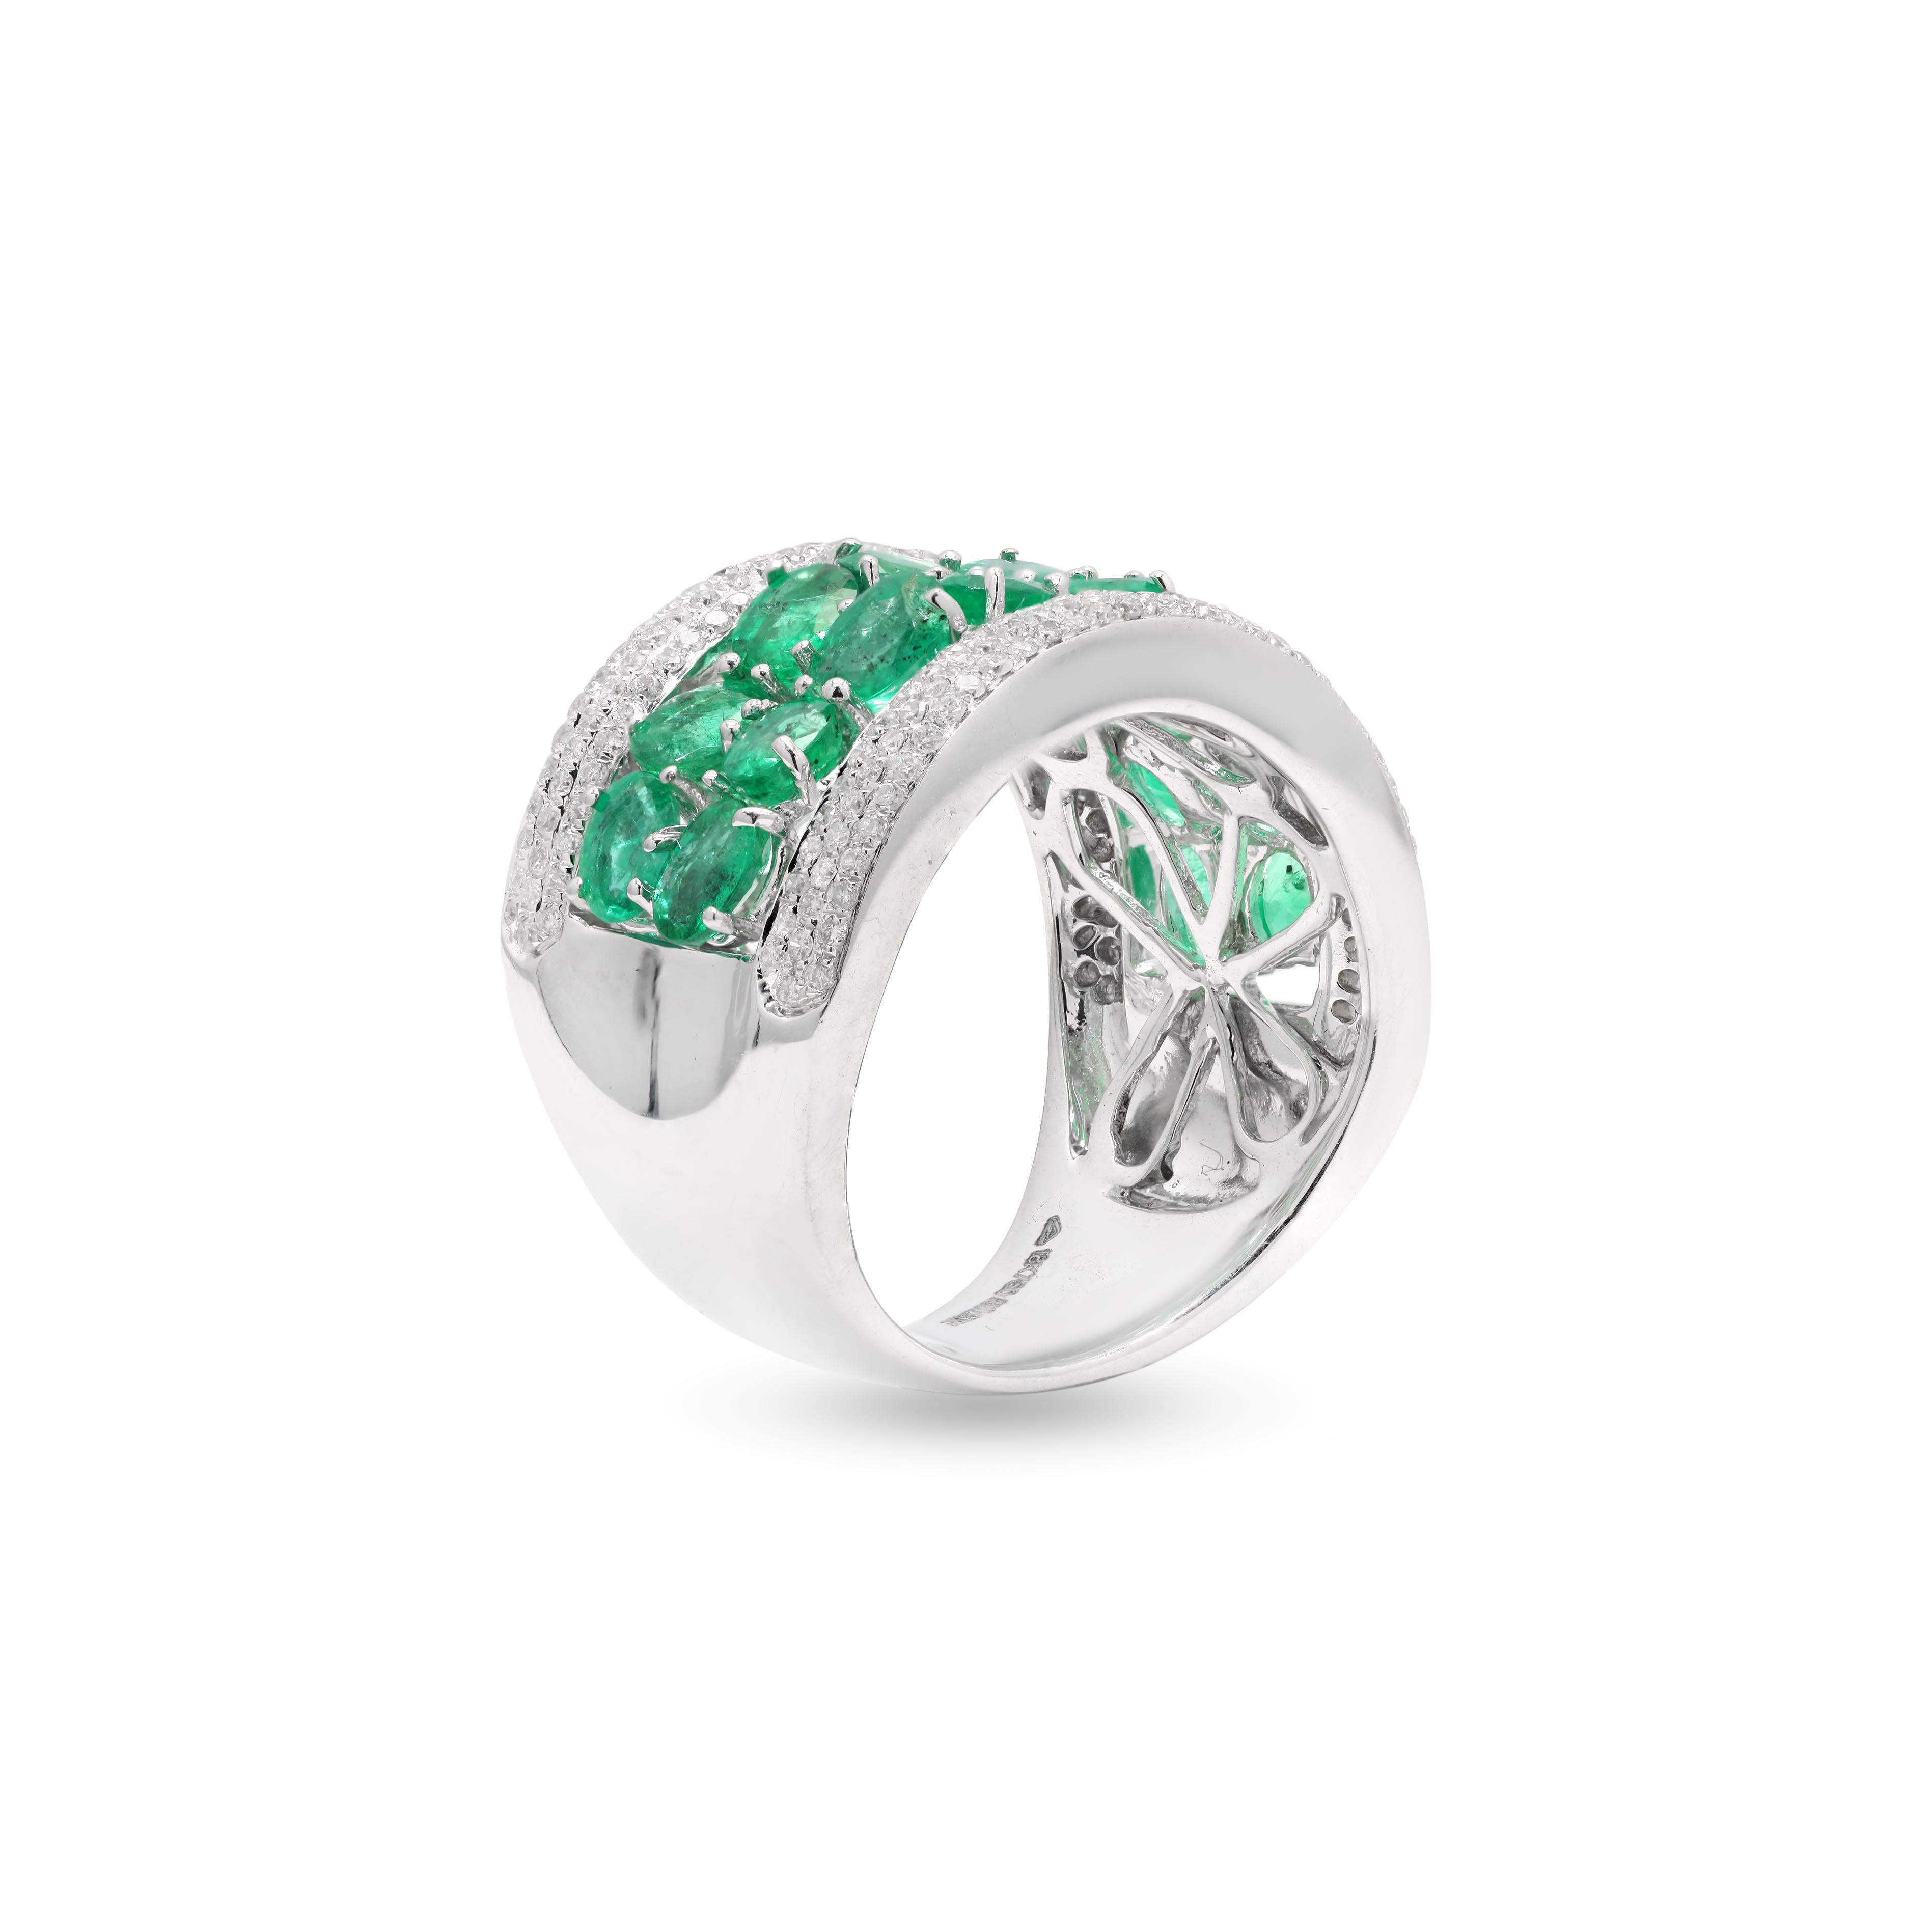 For Sale:  Stylish Emerald Wedding Band Ring with Diamond Solid 18k White Gold Ring  5